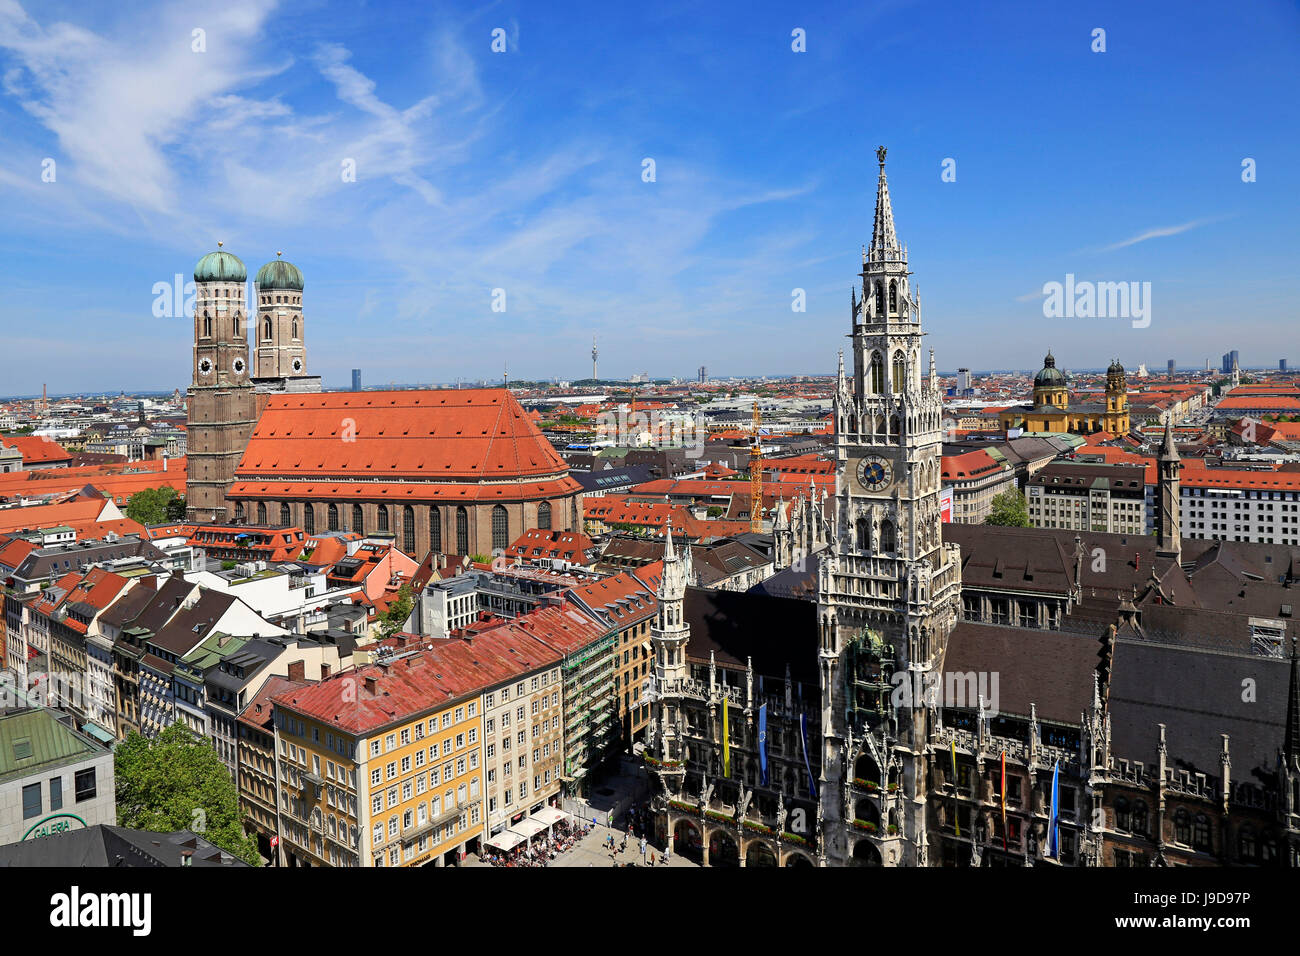 View from St. Peter's Church down to Marienplatz Square, City Hall and Church of Our Lady, Munich, Upper Bavaria, Germany Stock Photo